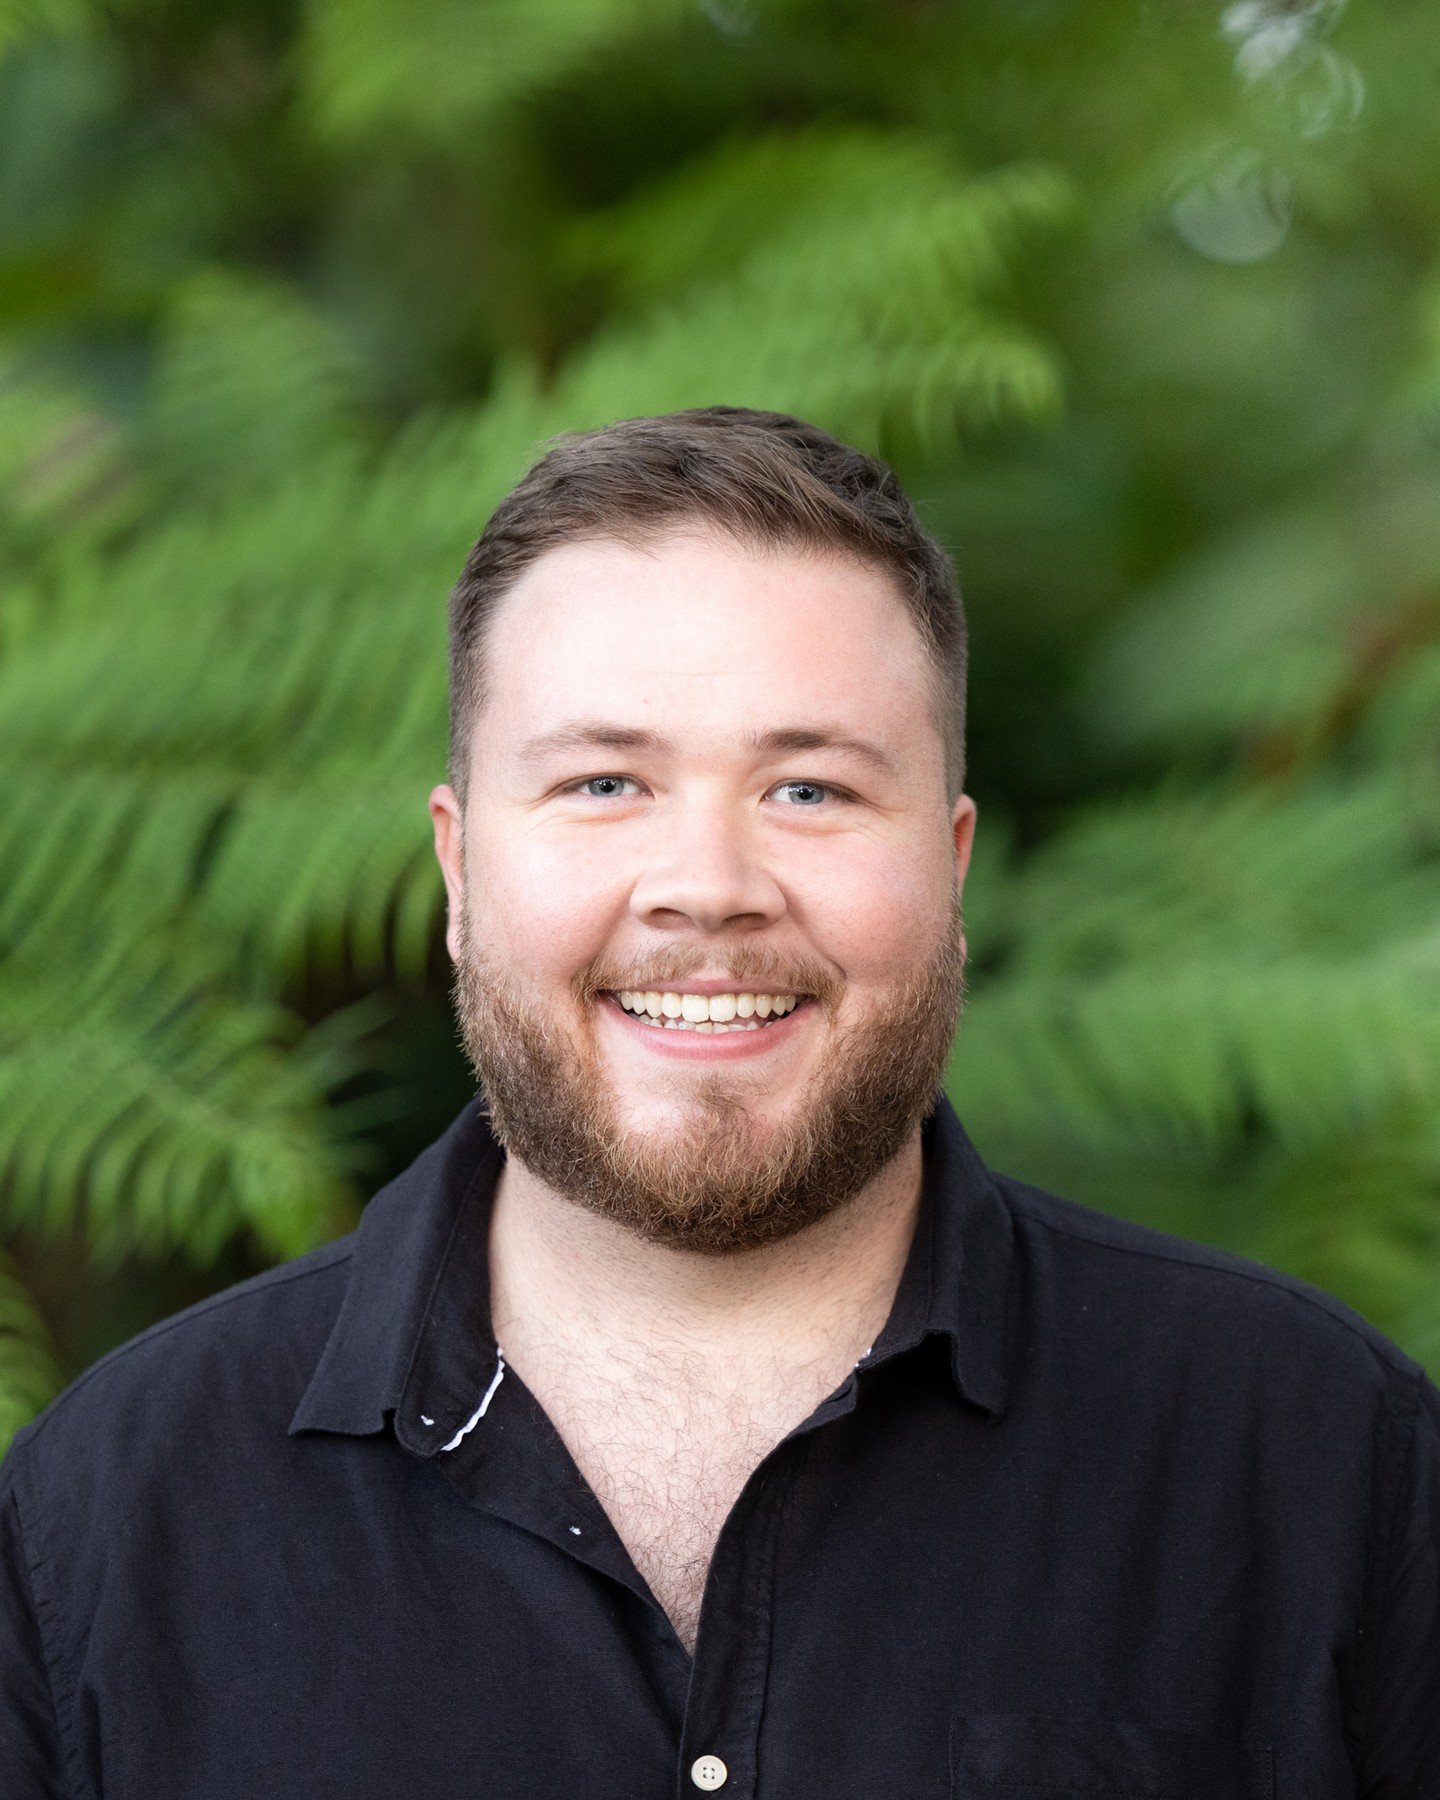 You&rsquo;re invited to a morning tea with Creative Australia!

Join SCCA for an informal meet and greet with Matthew Higgins, State Manager Development and Partnerships (Queensland) from Creative Australia, the Australian Government&rsquo;s principa